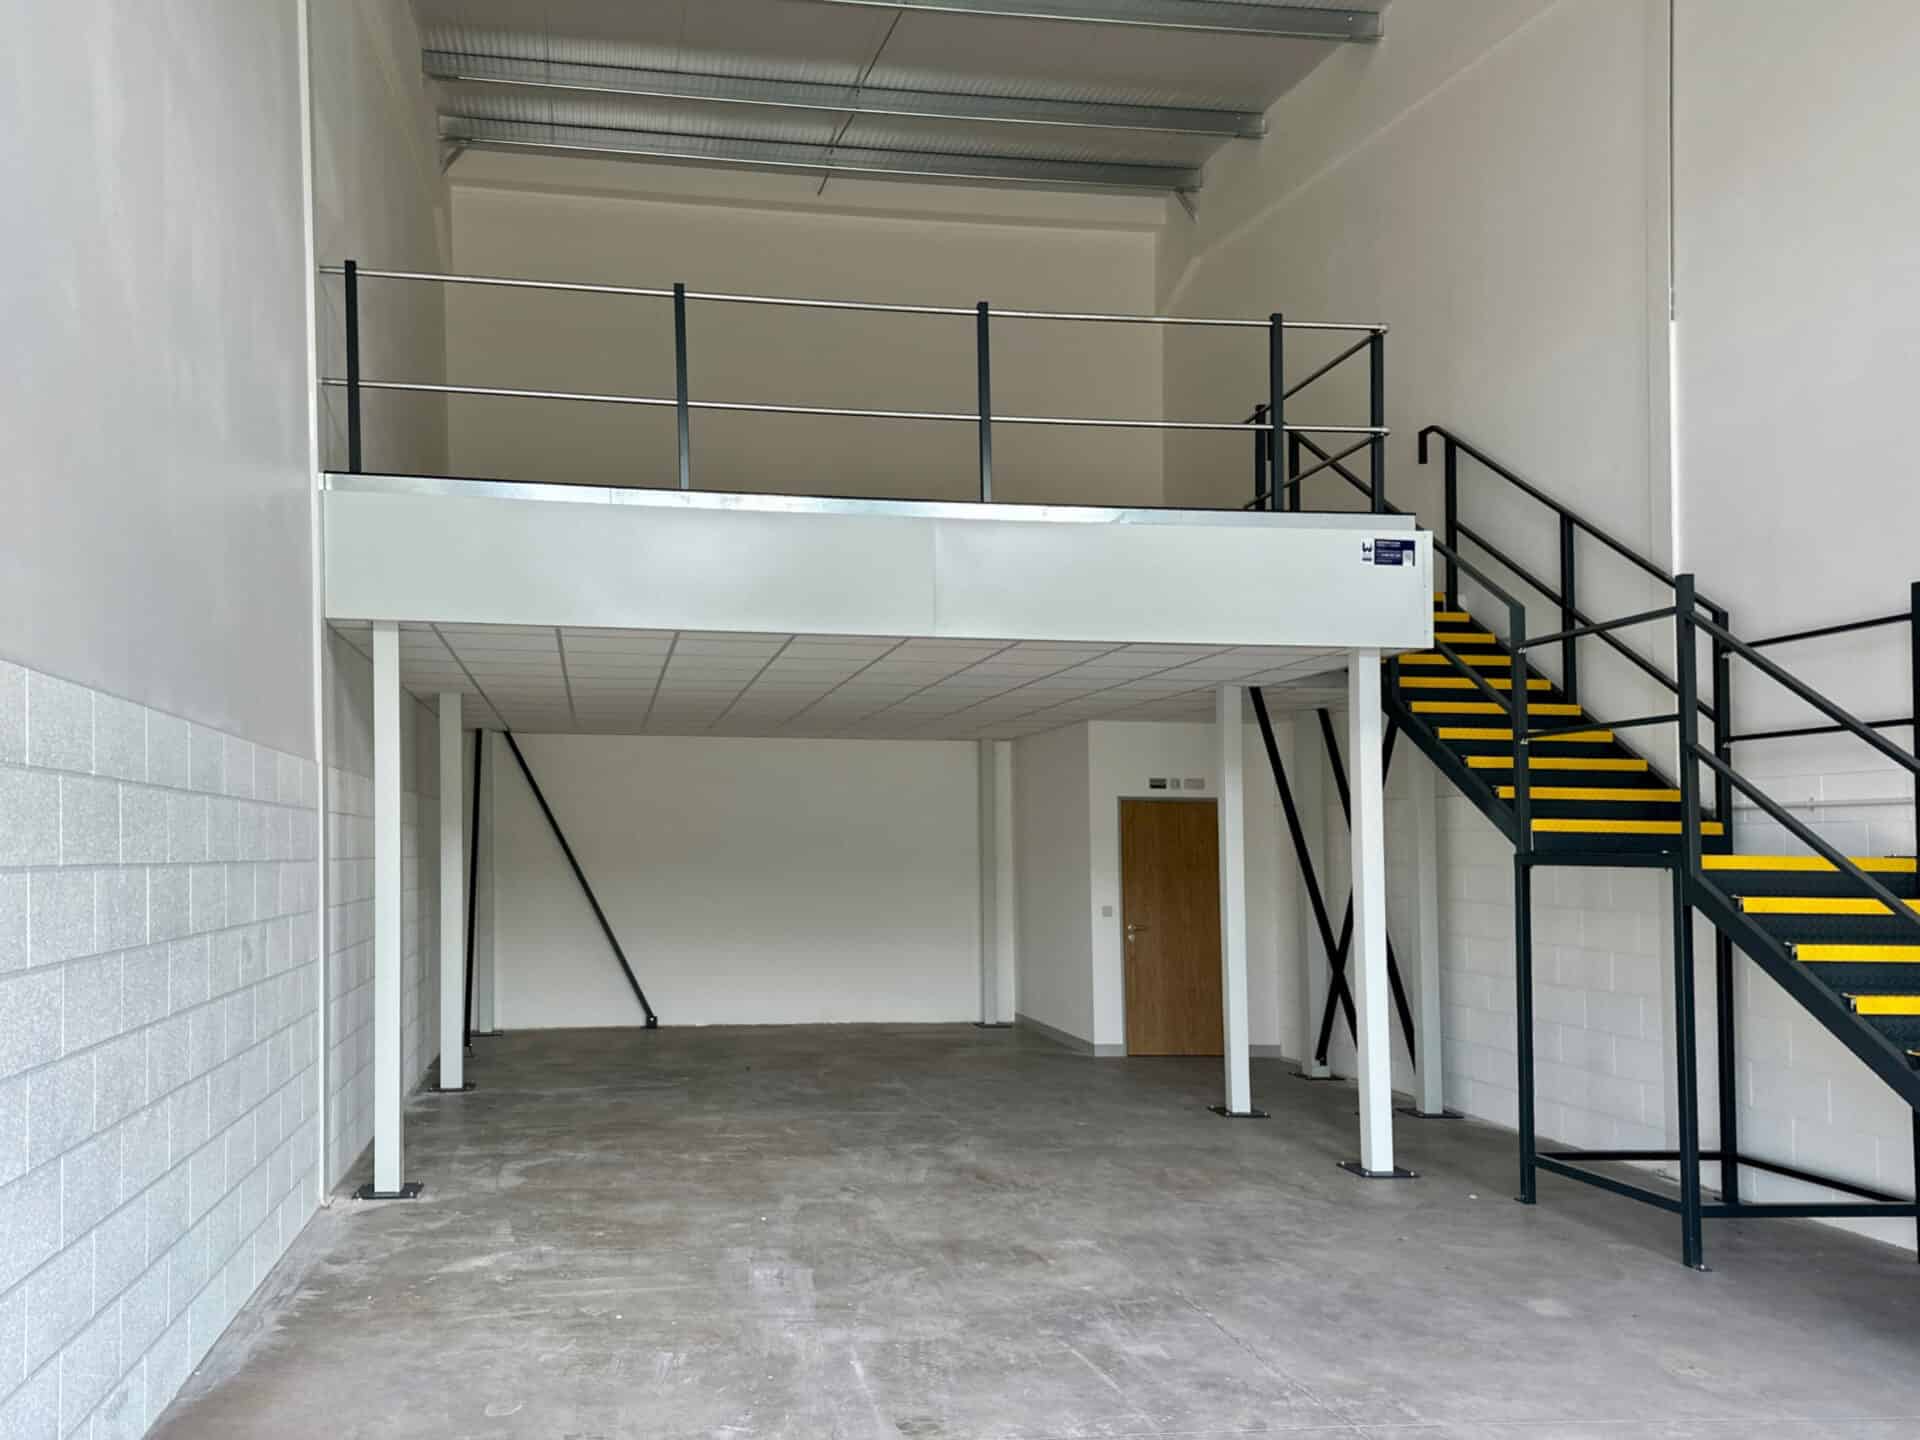 Interior view of a light industrial unit at Oak Tree, Kingskerswell, with a half mezzanine layout, offering flexibility for client-specific adaptations.